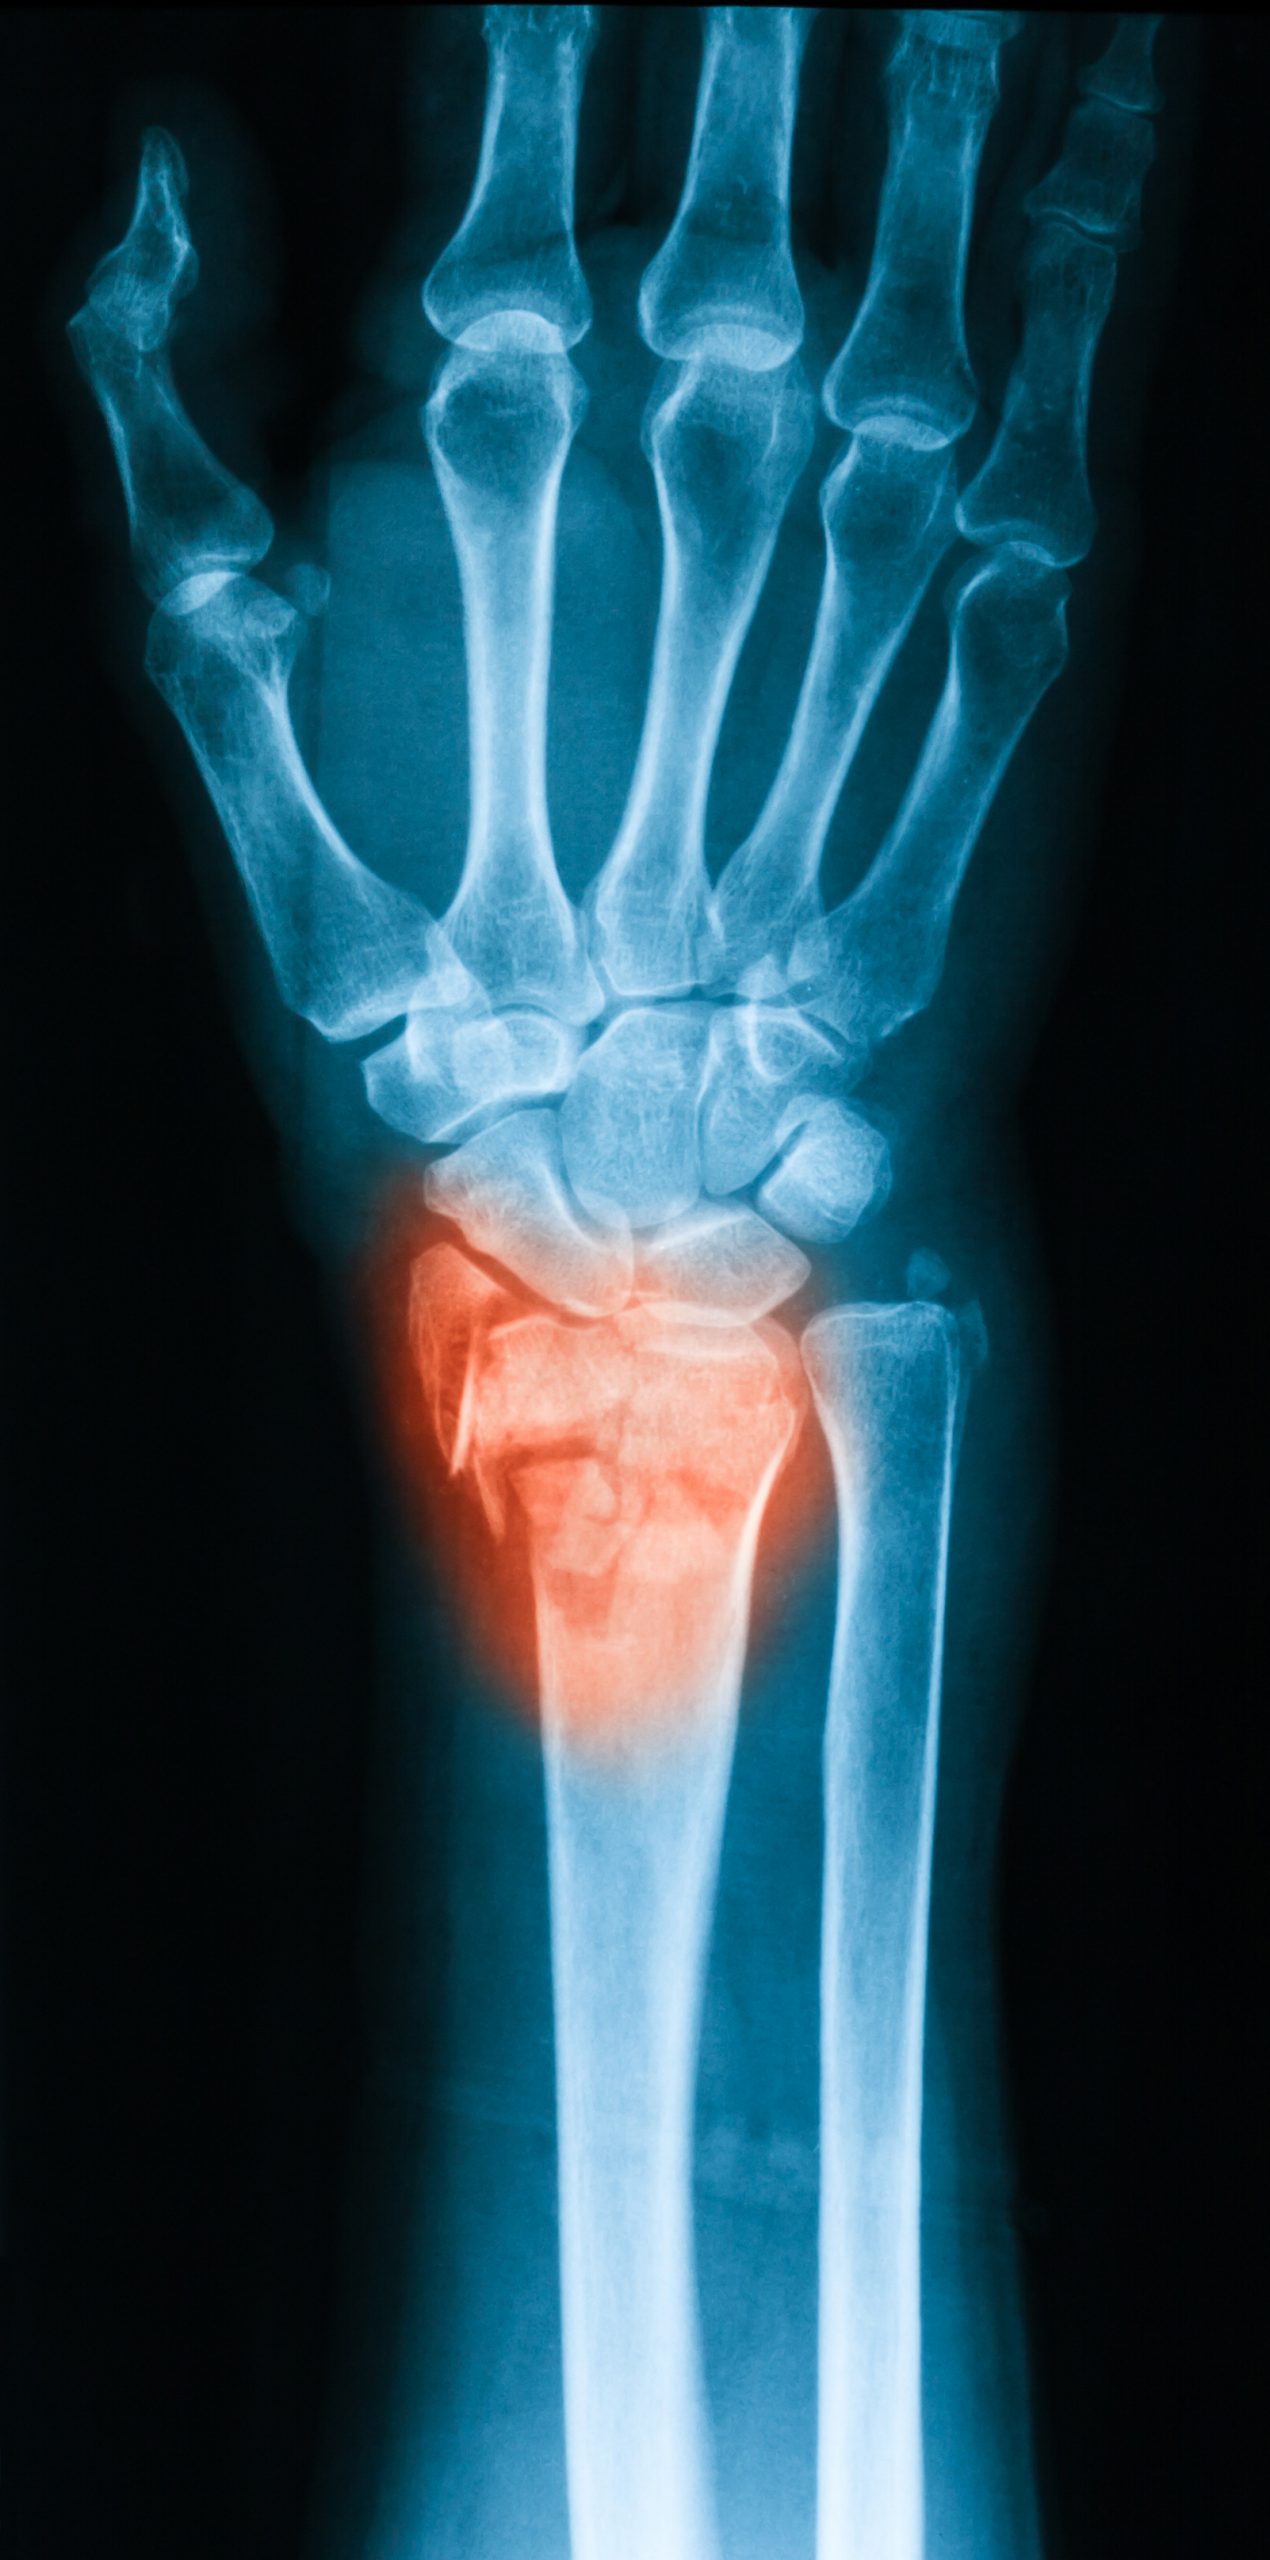 X-ray image of the wrist that shows bones coming into contact with each other.